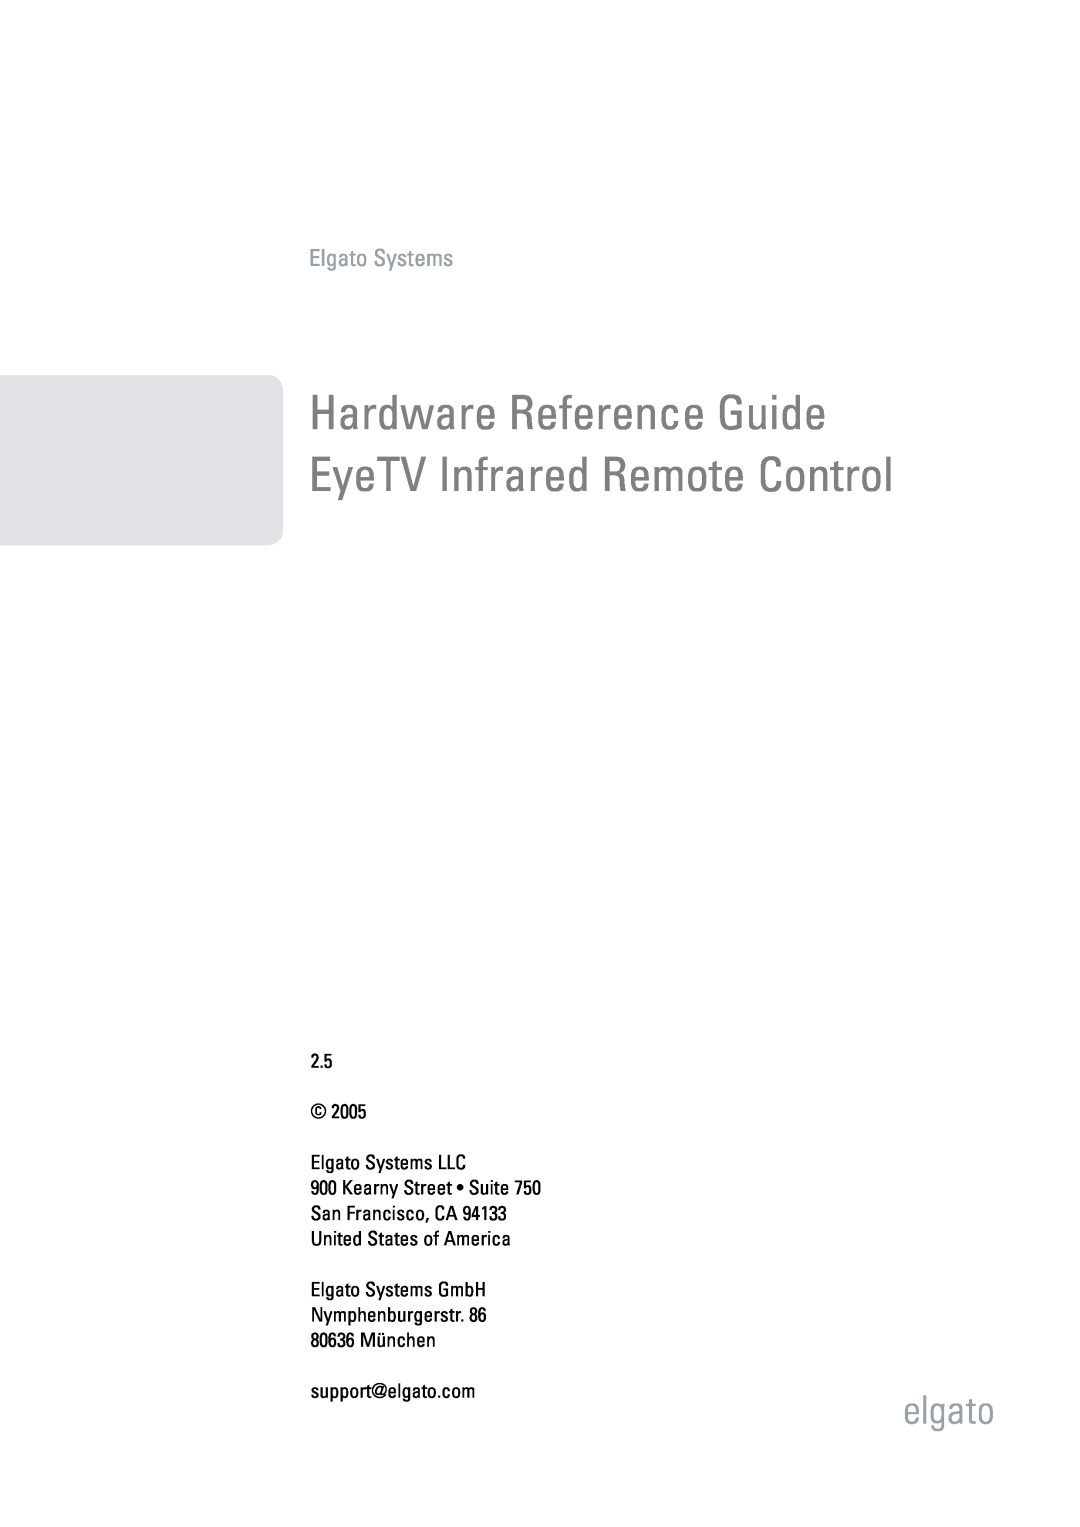 Elgato manual Elgato Systems, Hardware Reference Guide EyeTV Infrared Remote Control 